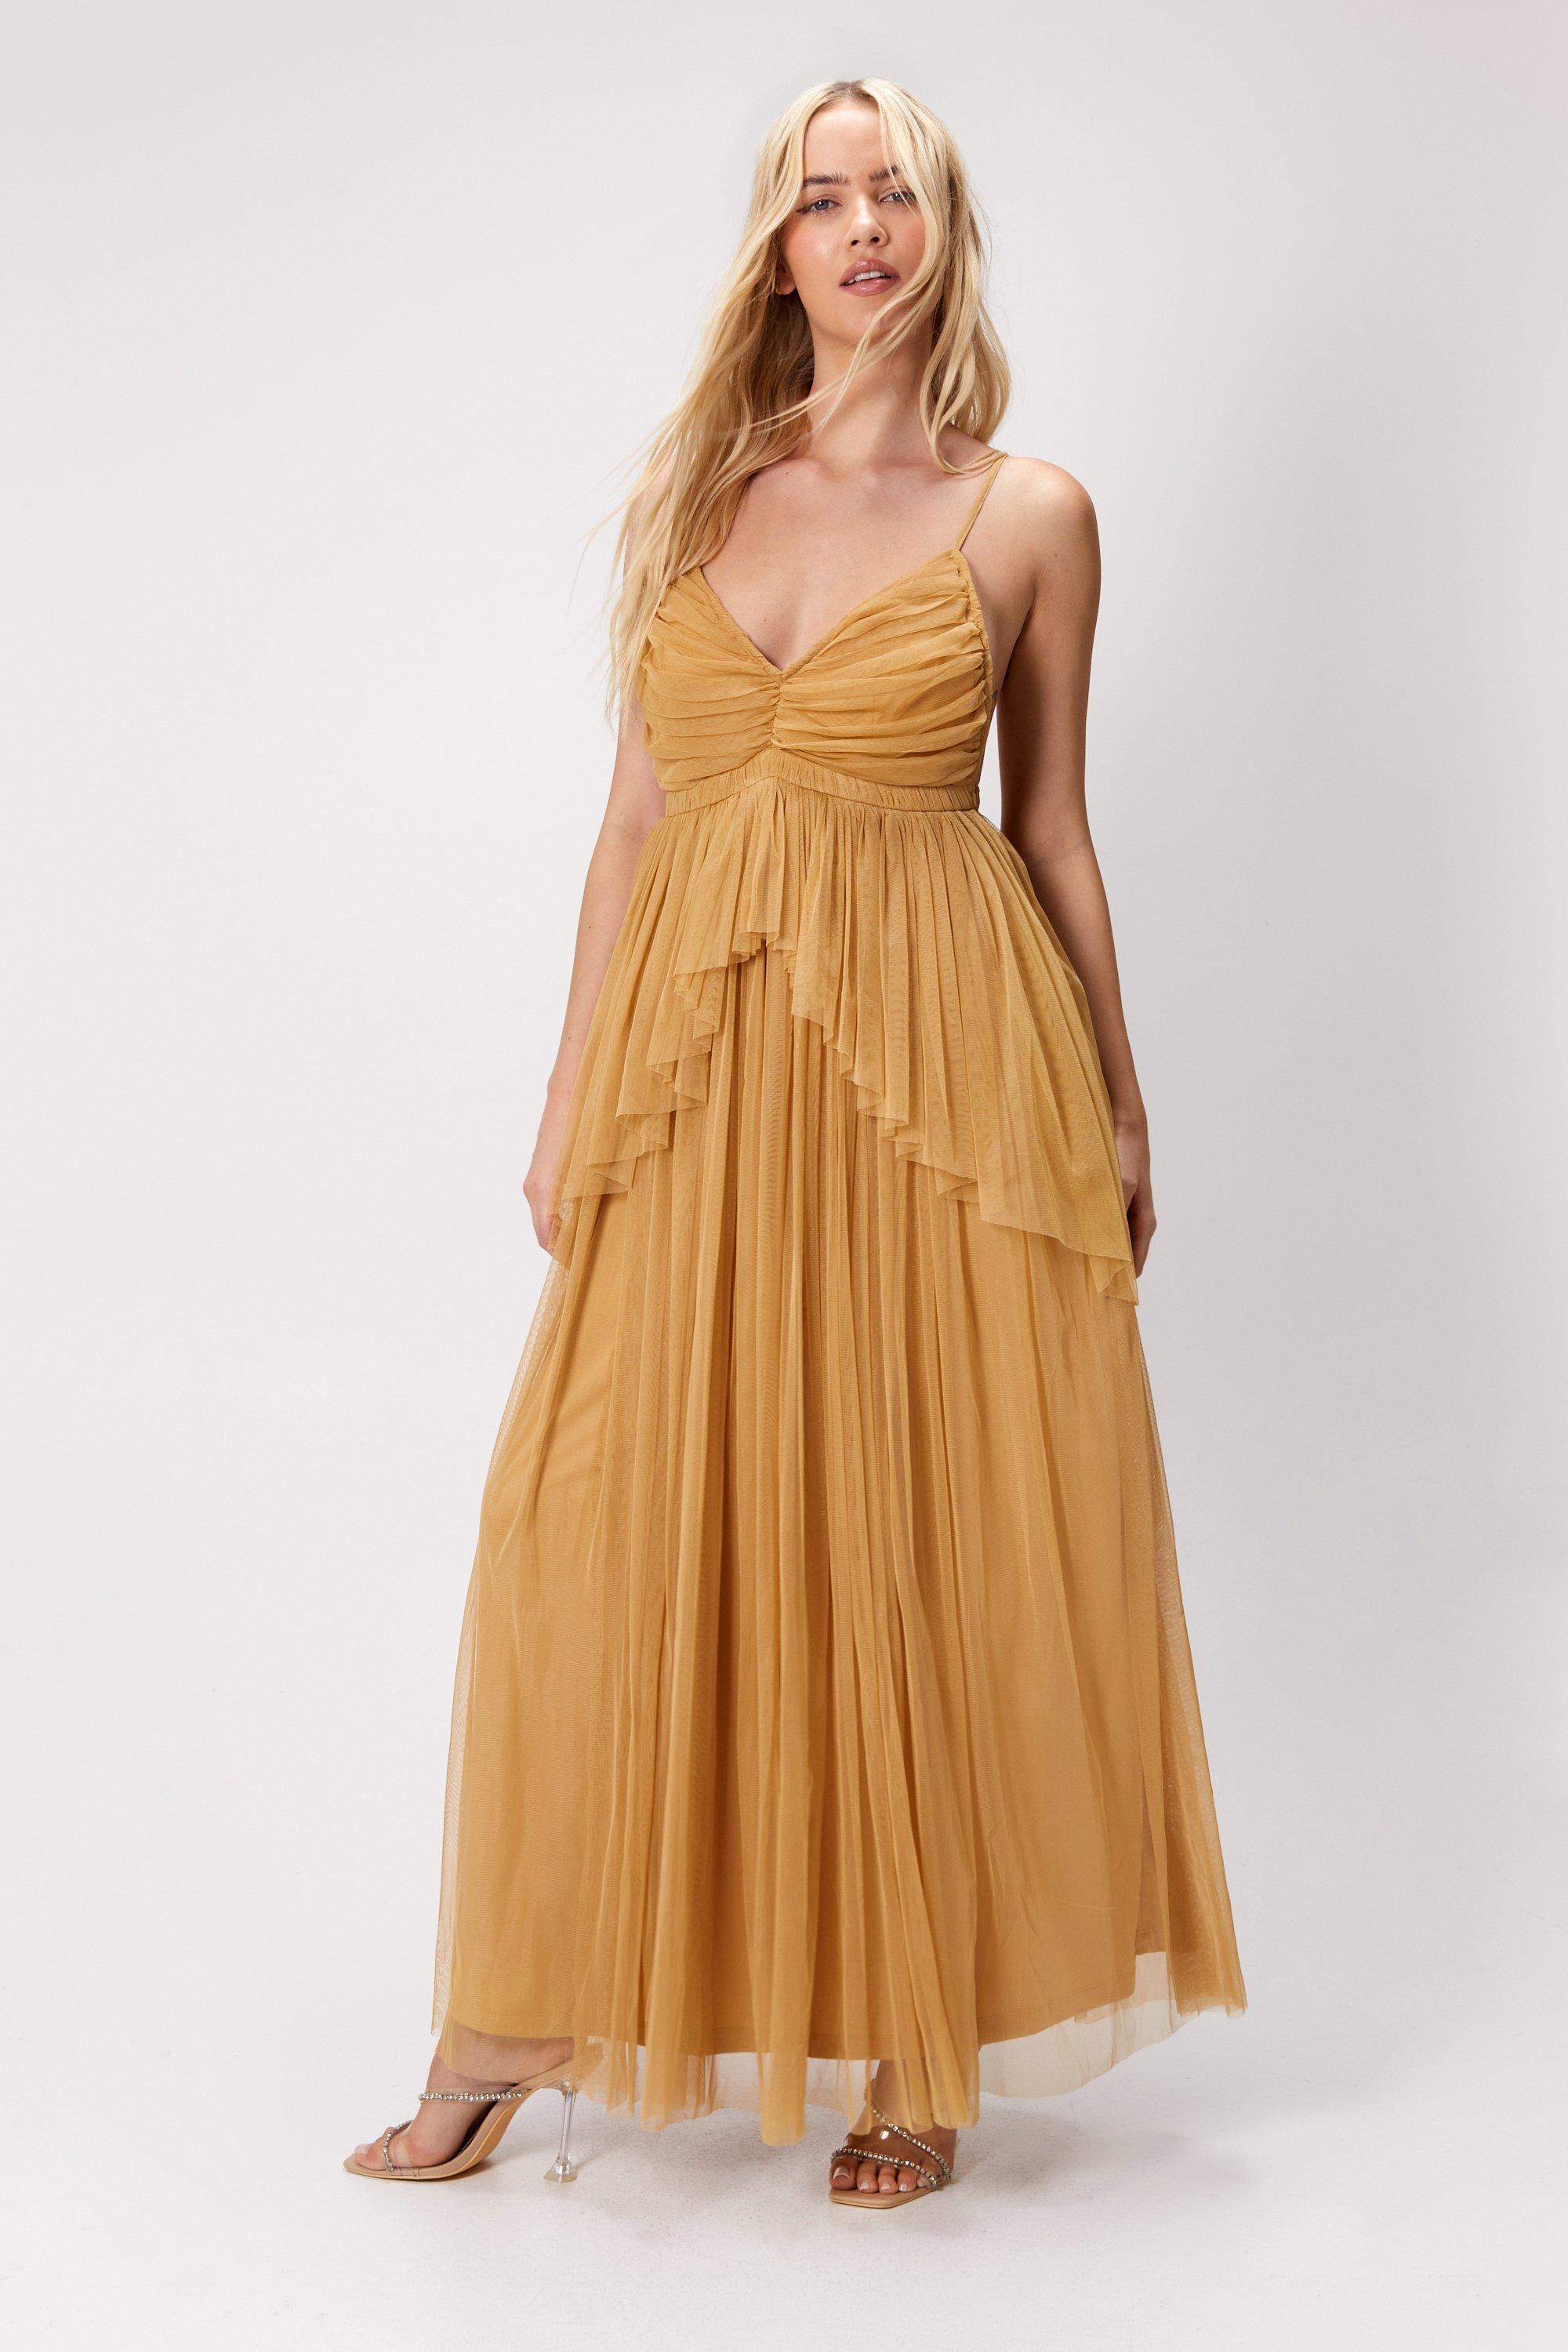 1950s History of Prom, Party, Evening and Formal Dresses Womens Tulle Strappy Maxi Dress - Sand - 10 $188.00 AT vintagedancer.com